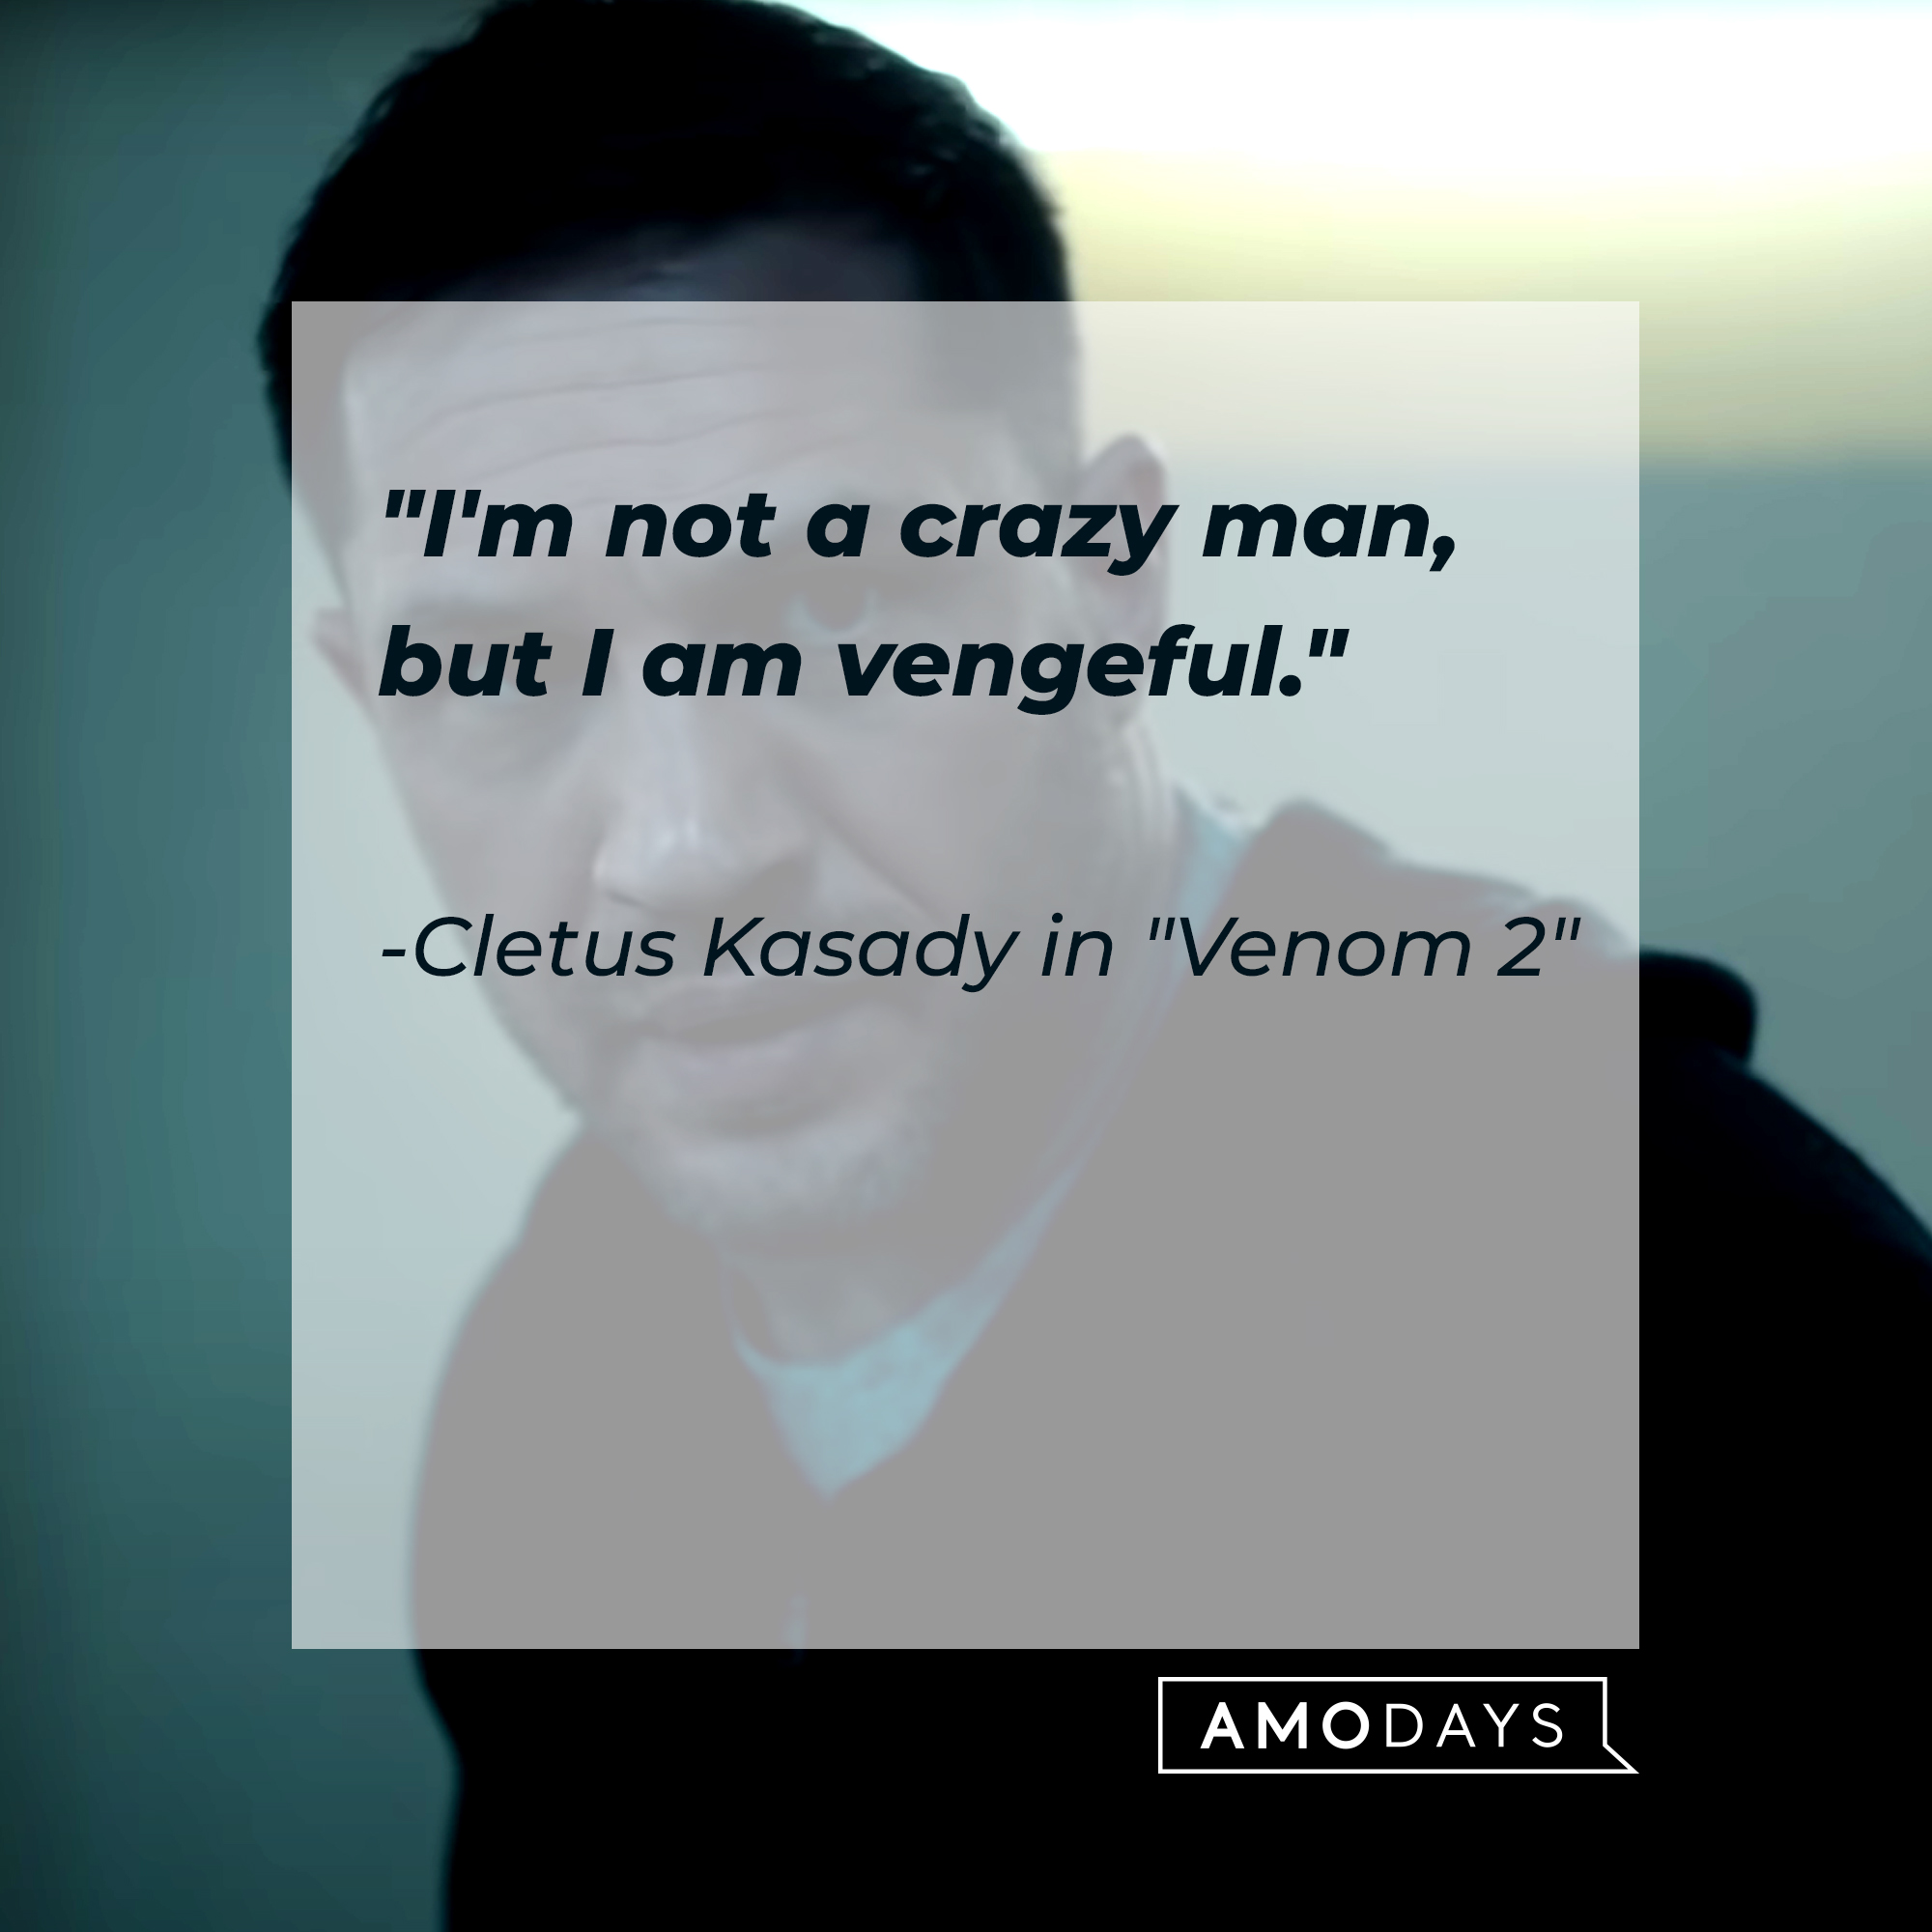 Eddie Brooke with Cletus Kasady's quote, "I'm not a crazy man, but I am vengeful." | Source: YouTube/sonypictures